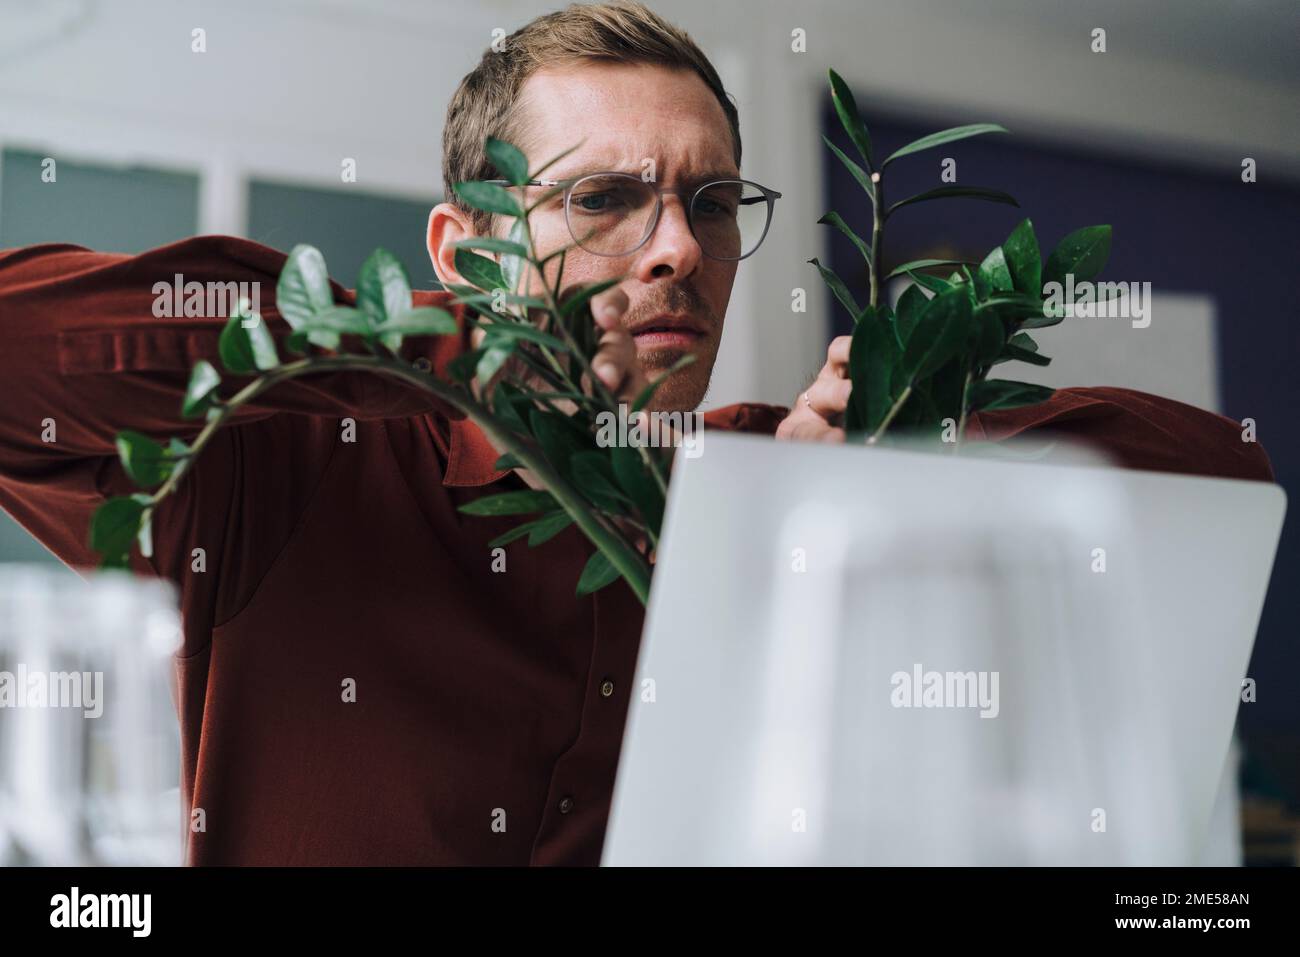 Worried businessman looking at plant in office Stock Photo